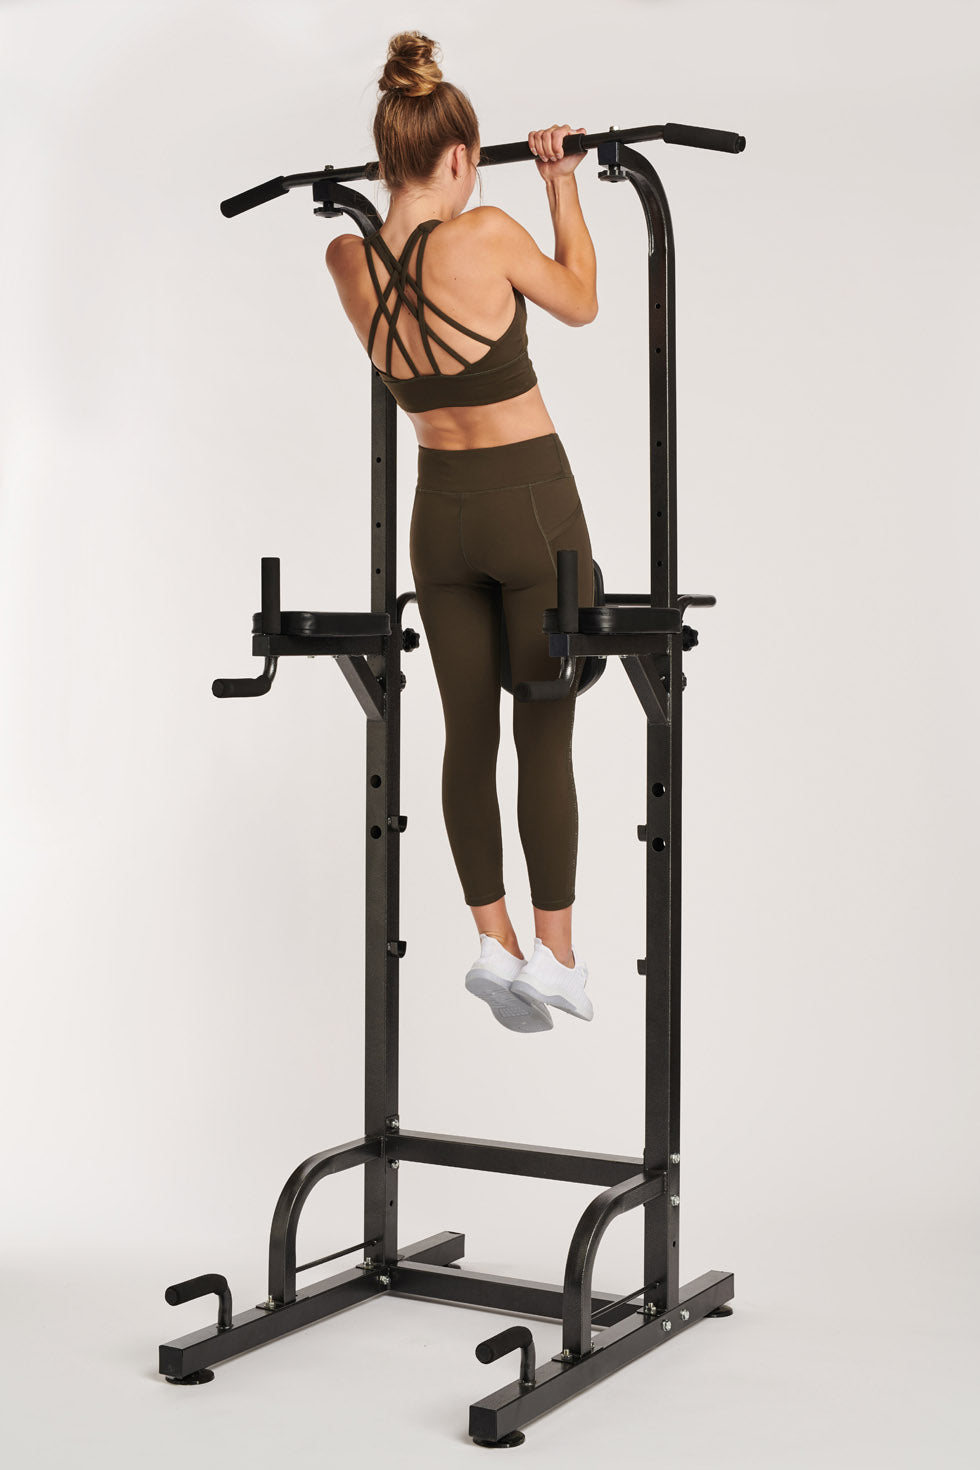 Active Panther Pull Up Station - Pull Up Bar - Krachtstation - Power station - Home gym - Thuis sporten - Fitness station - Optrek stang